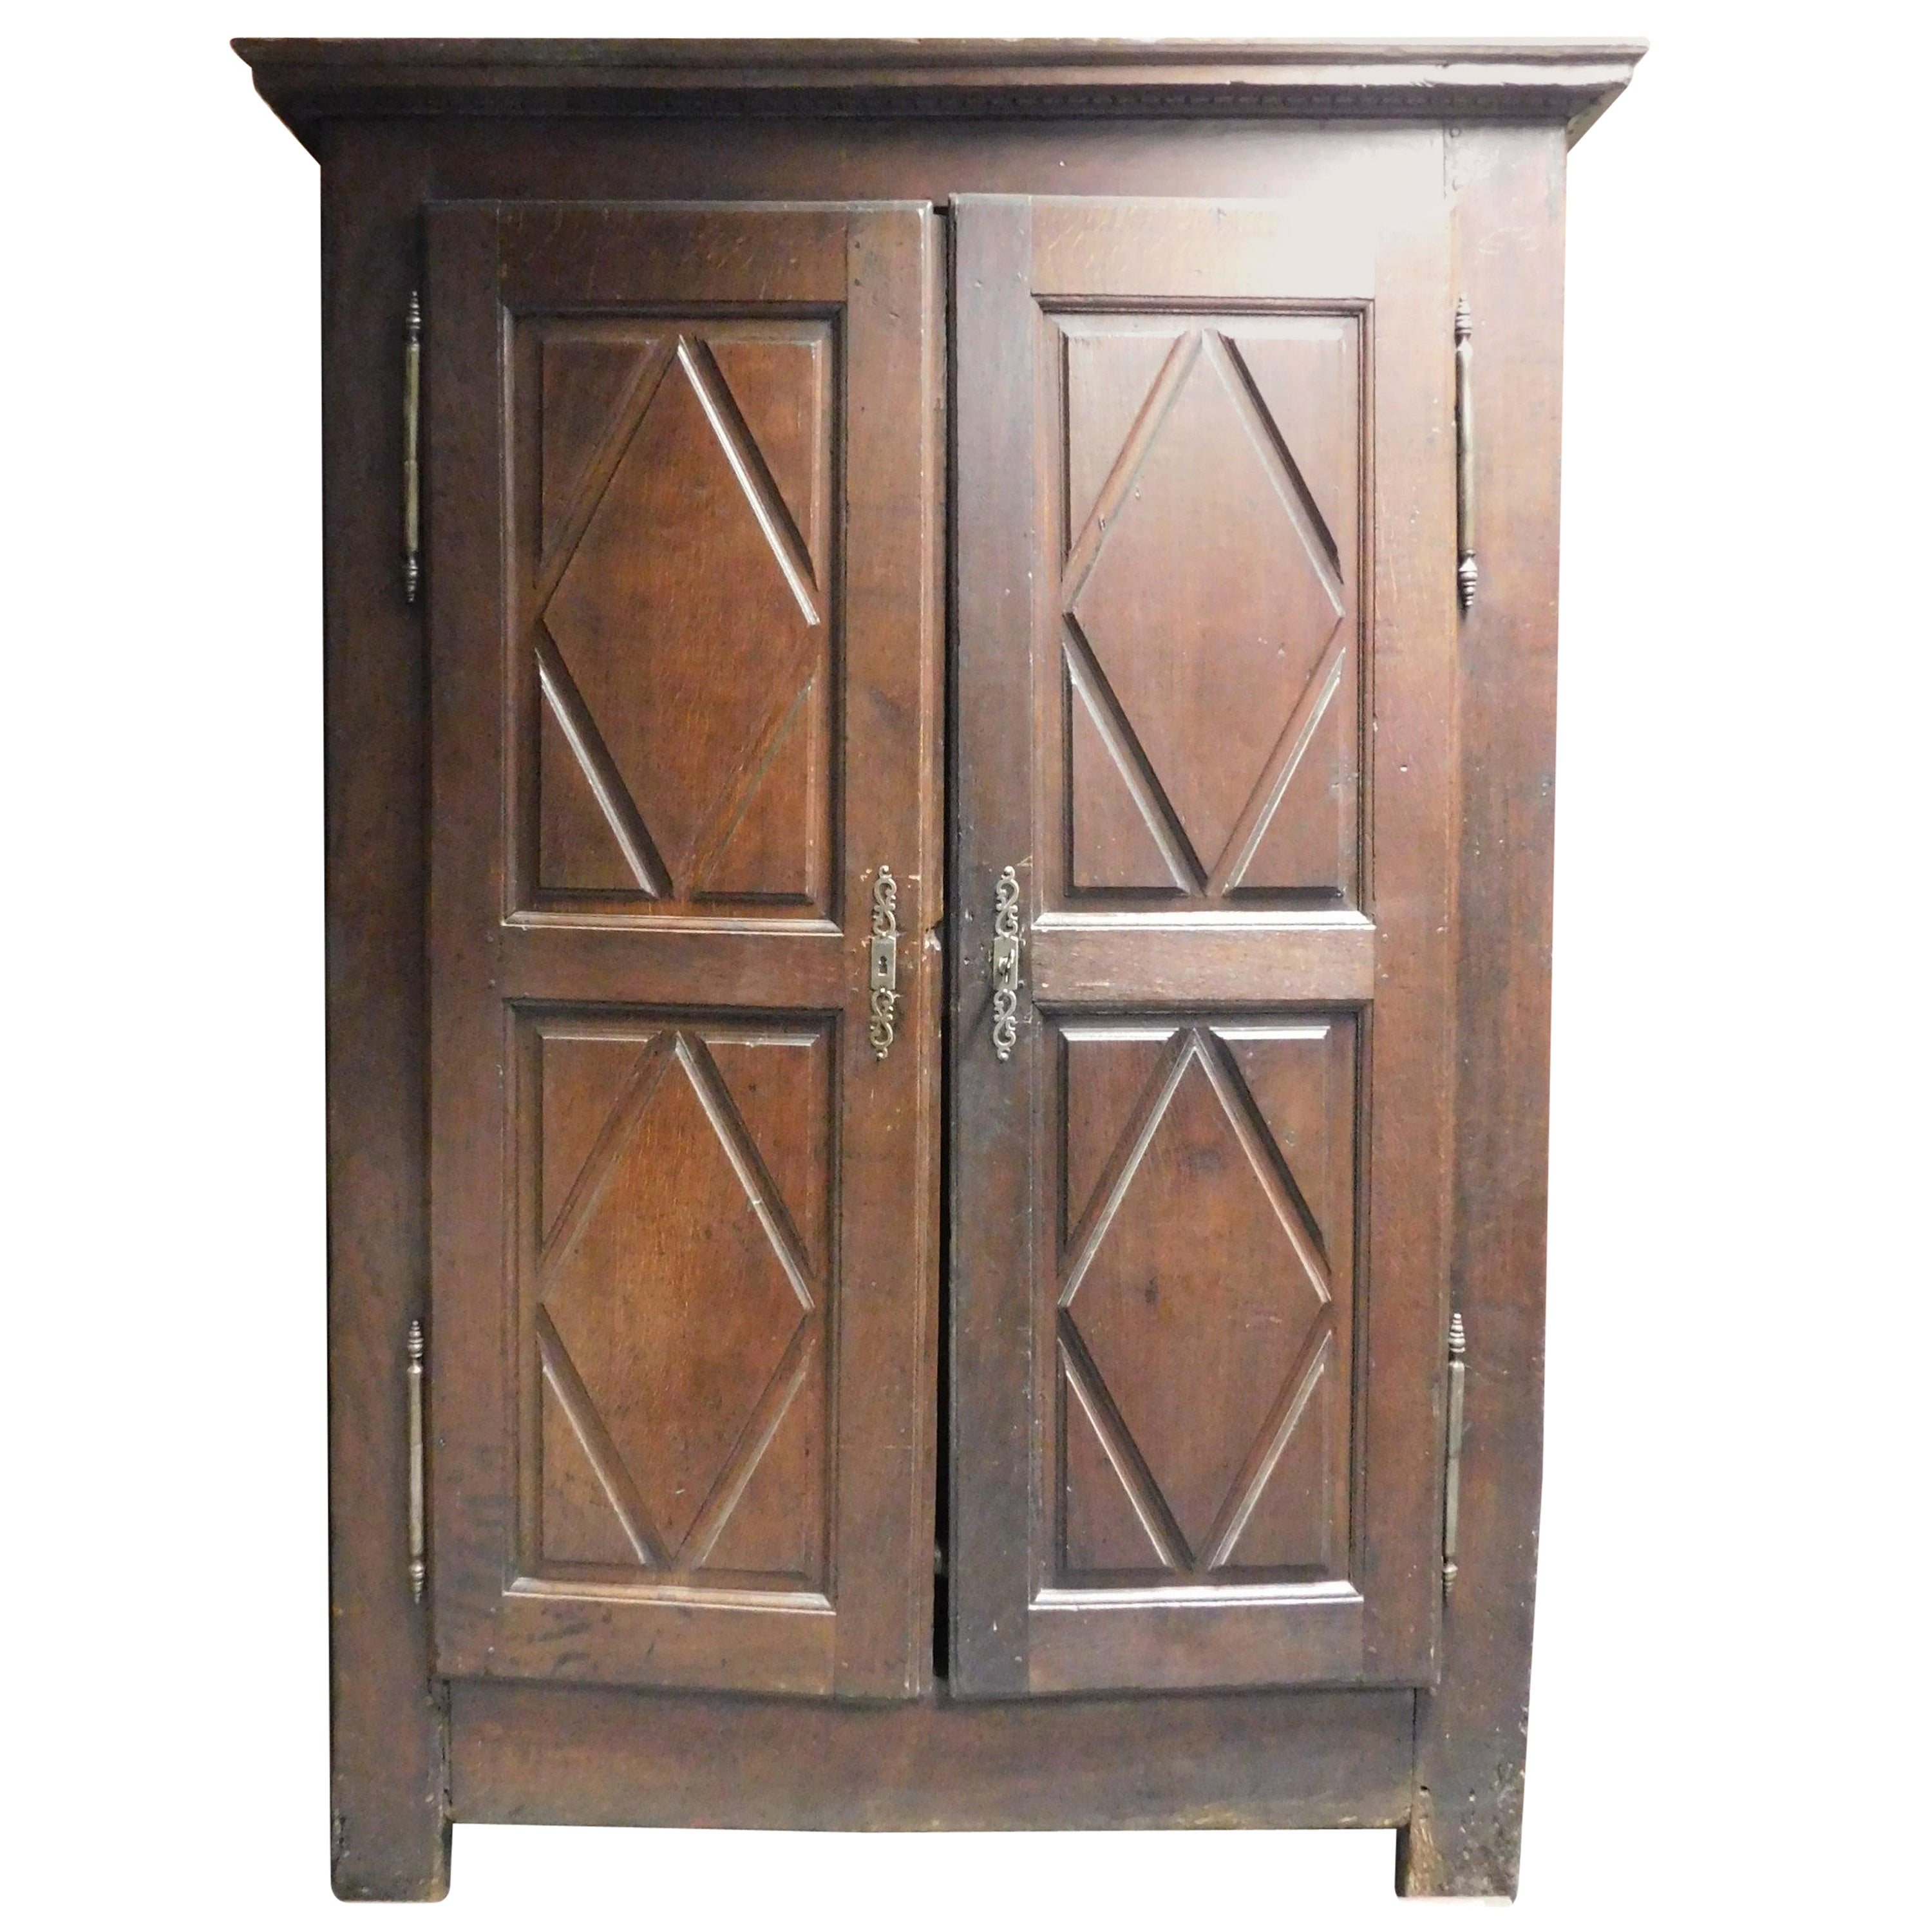 Old Solid Oak Wood Wardrobe with Lozenge Shaped Tiles, 18th Century Italy For Sale